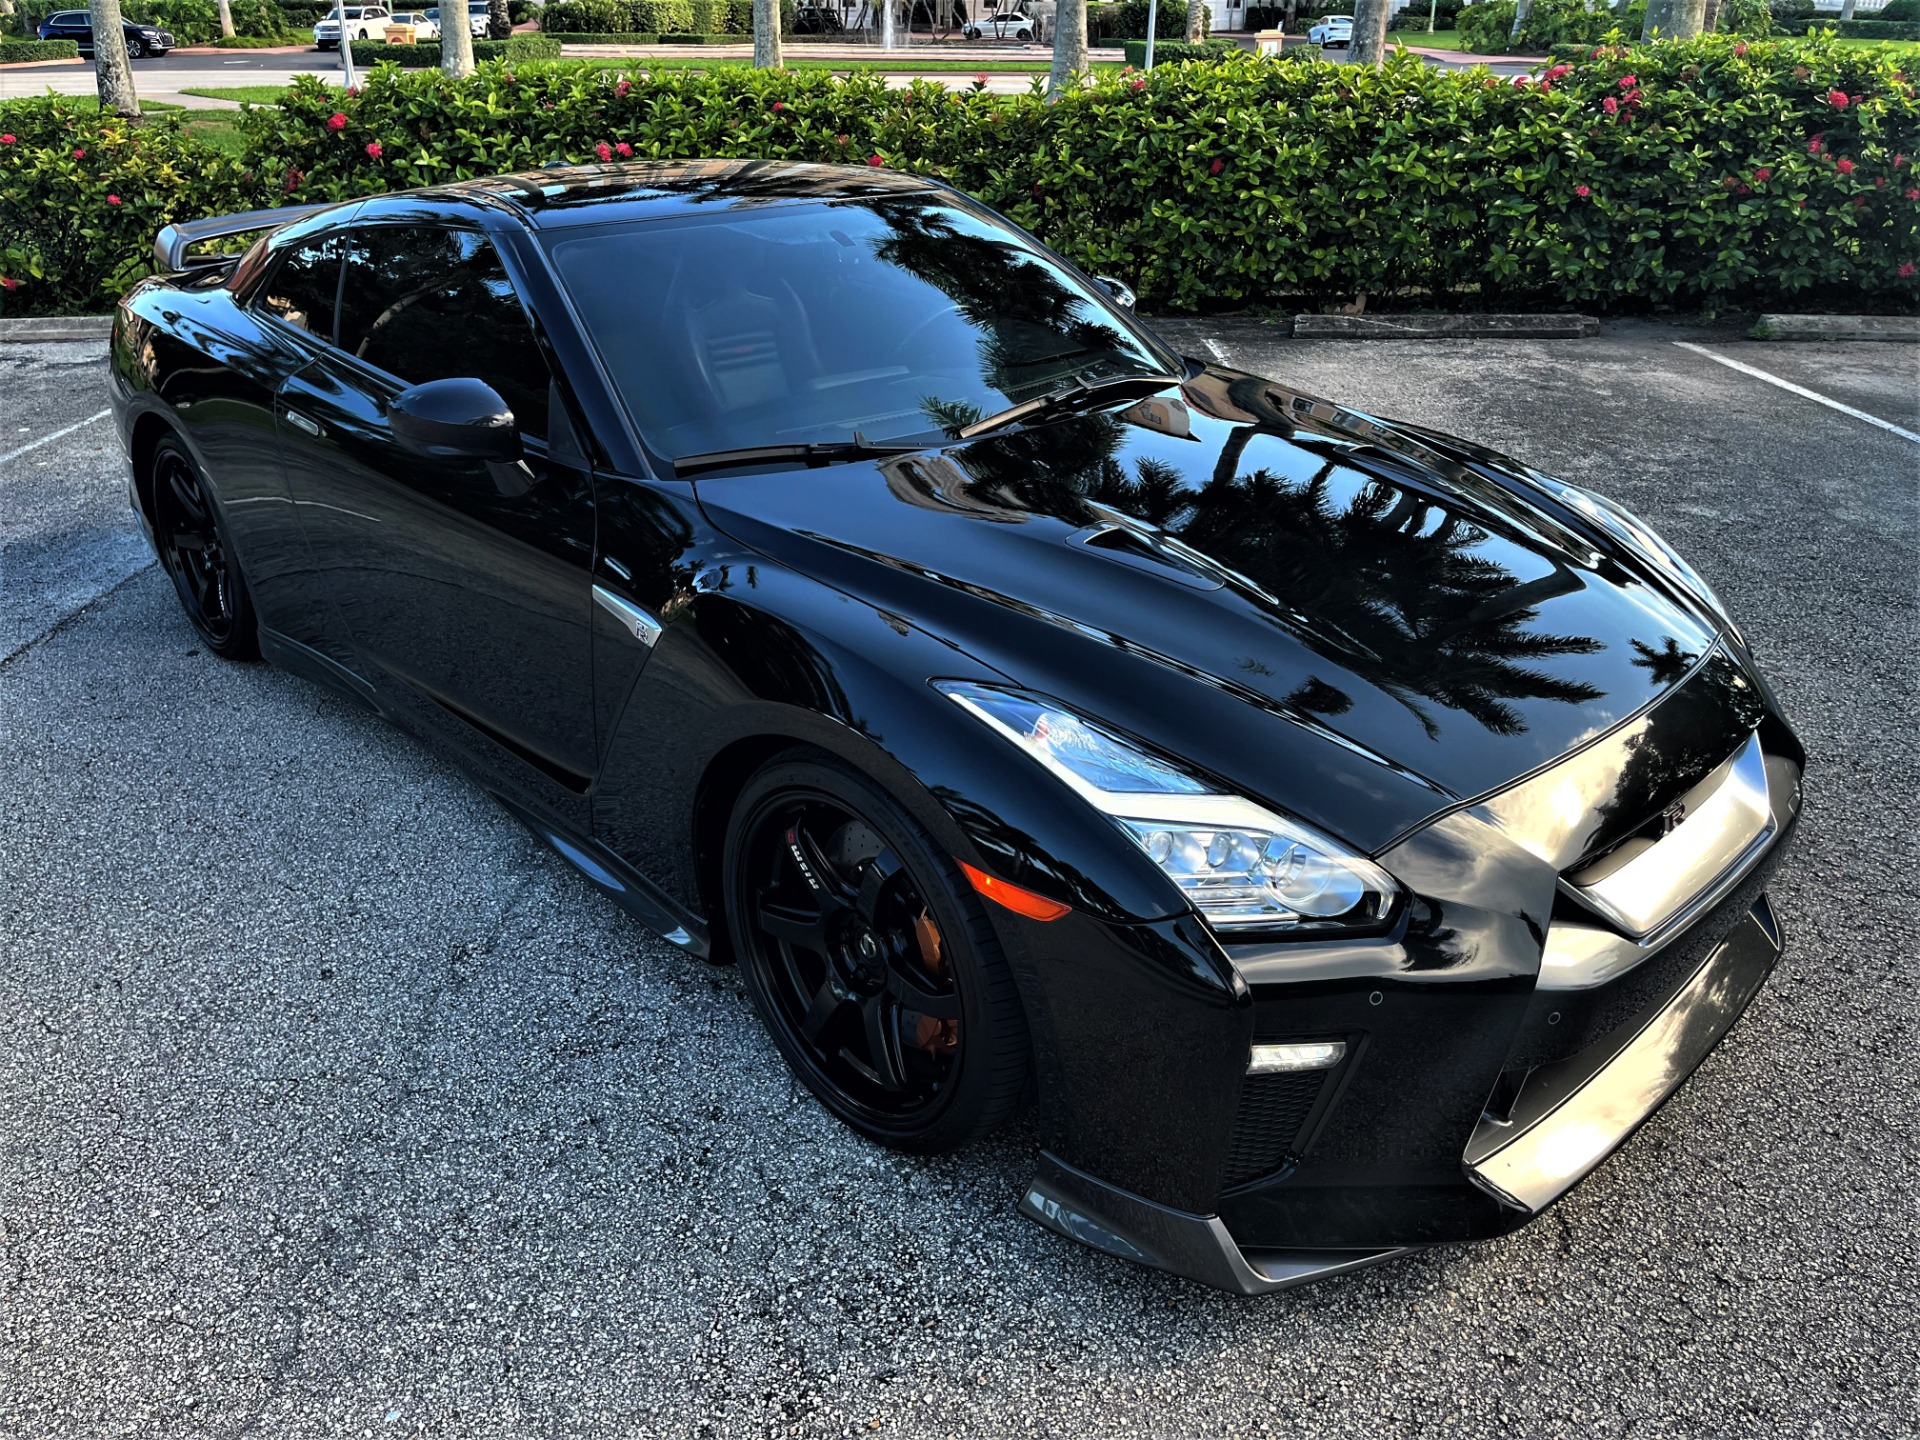 Used 2019 Nissan GT-R Track Edition for sale $115,850 at The Gables Sports Cars in Miami FL 33146 3